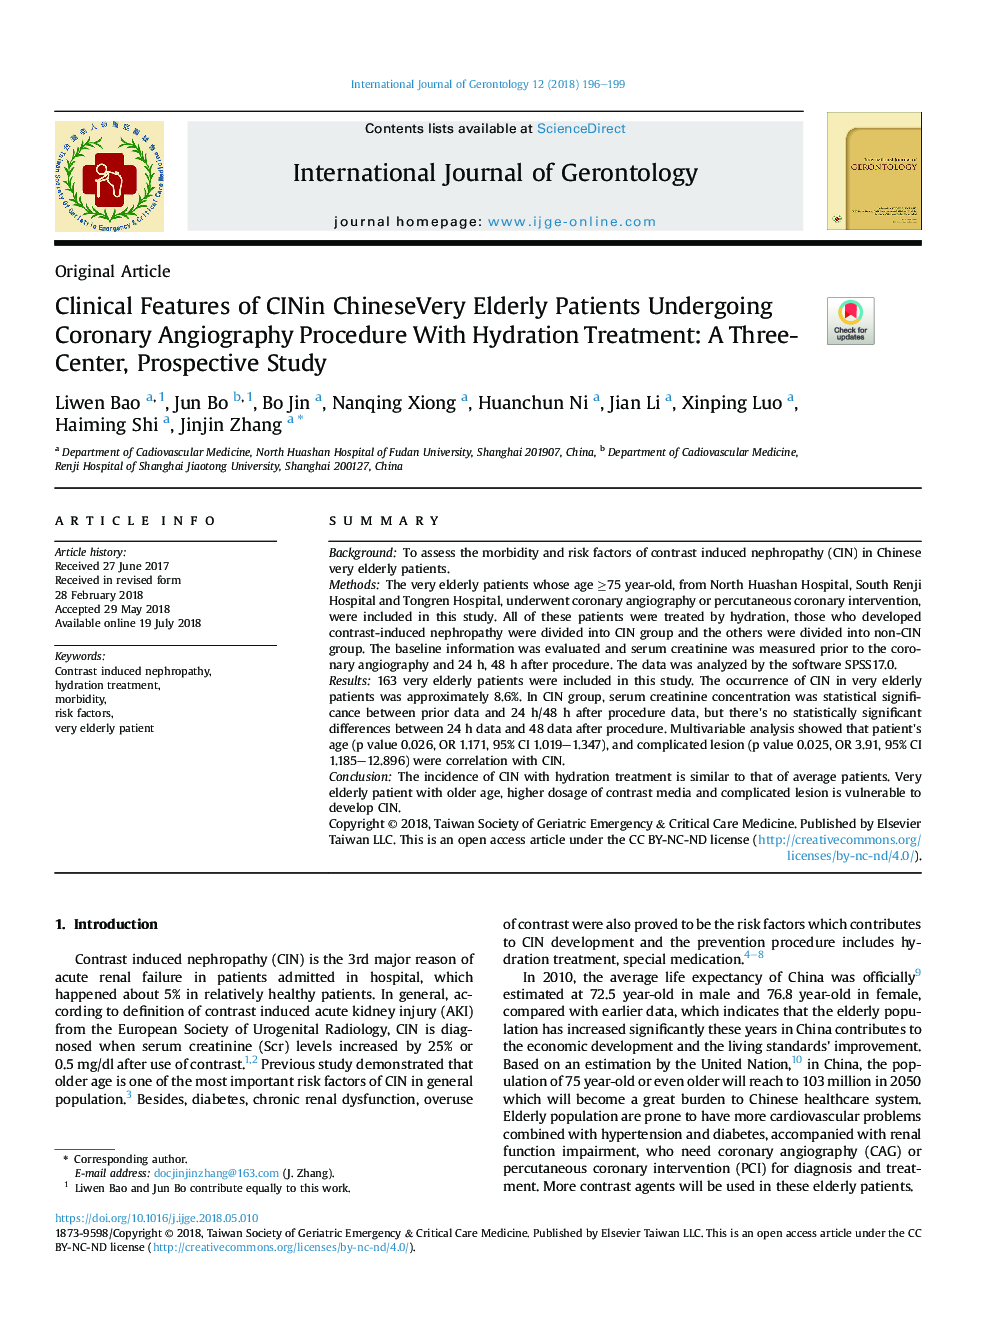 Clinical Features of CINin ChineseVery Elderly Patients Undergoing Coronary Angiography Procedure With Hydration Treatment: A Three-Center, Prospective Study